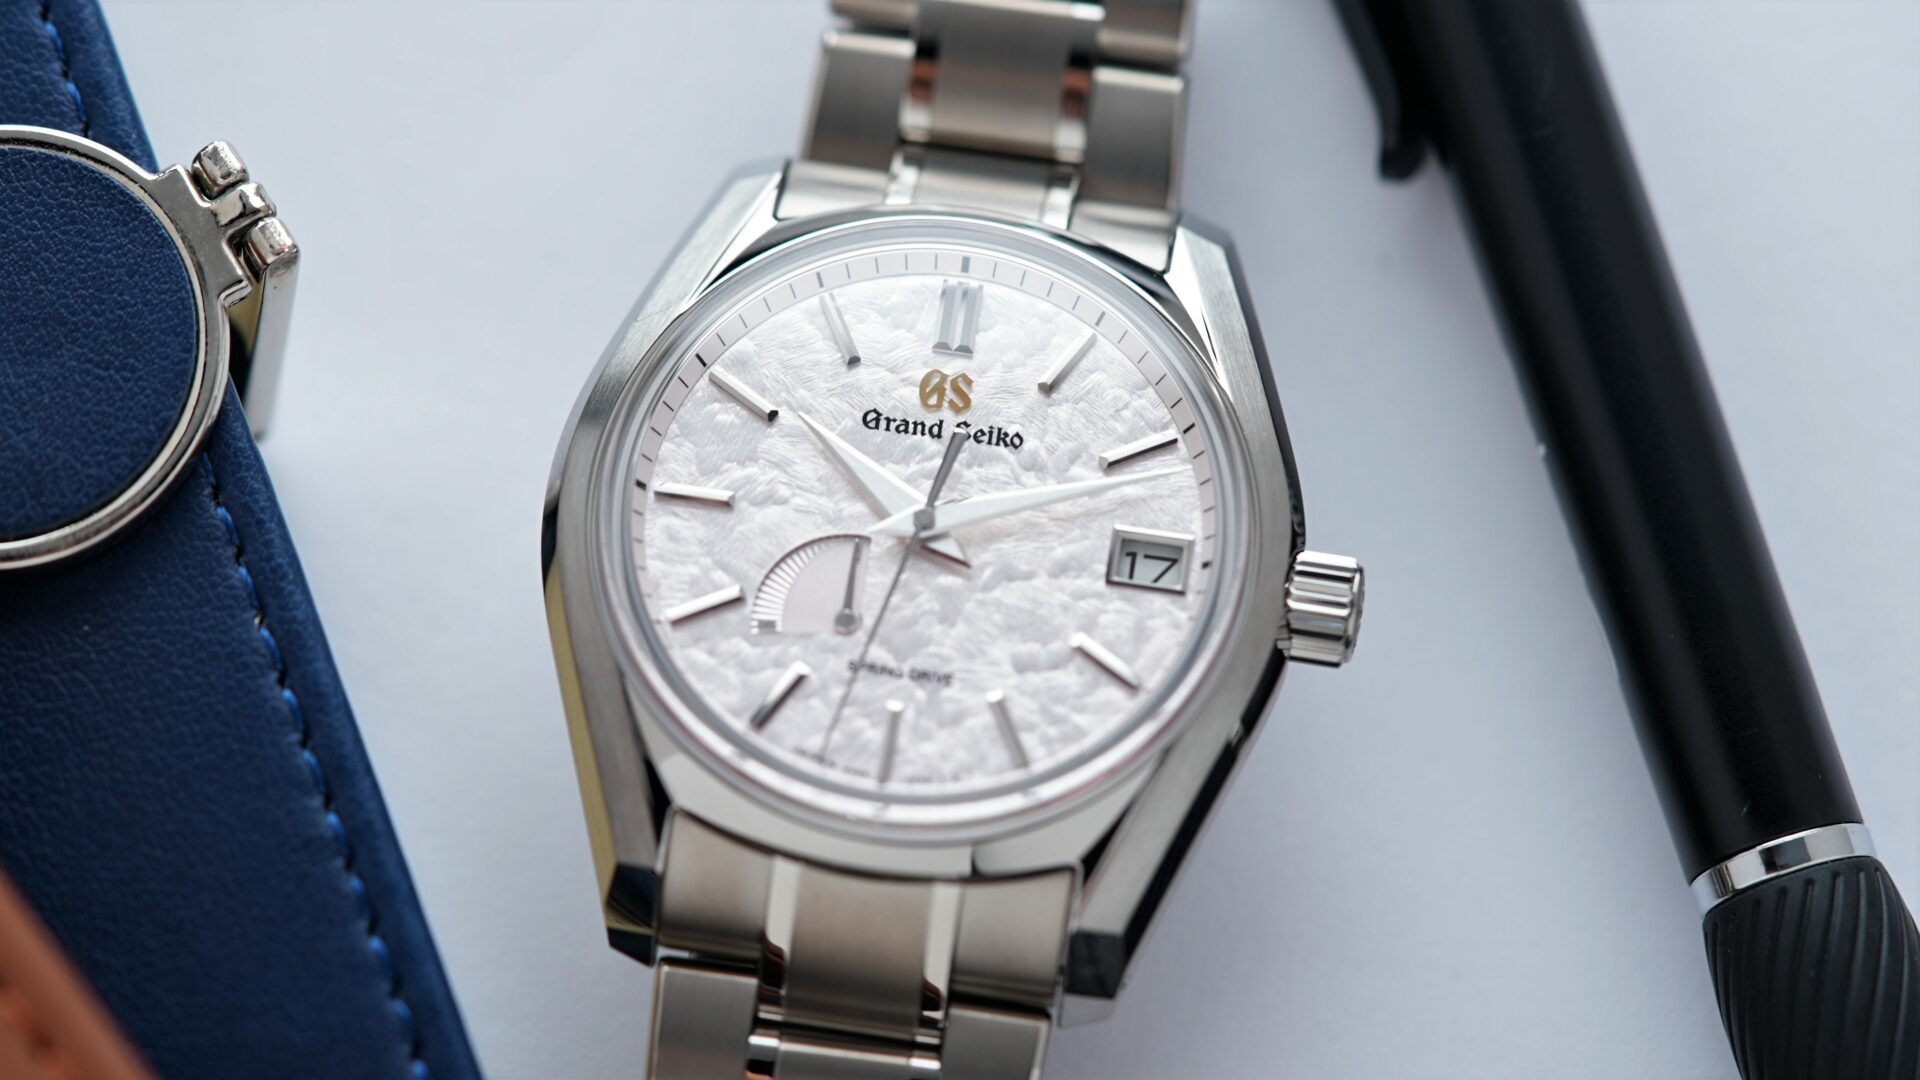 Grand Seiko Heritage Collection Seasons 'Spring' SBGA413 watch on display with notebooks and pen in background.